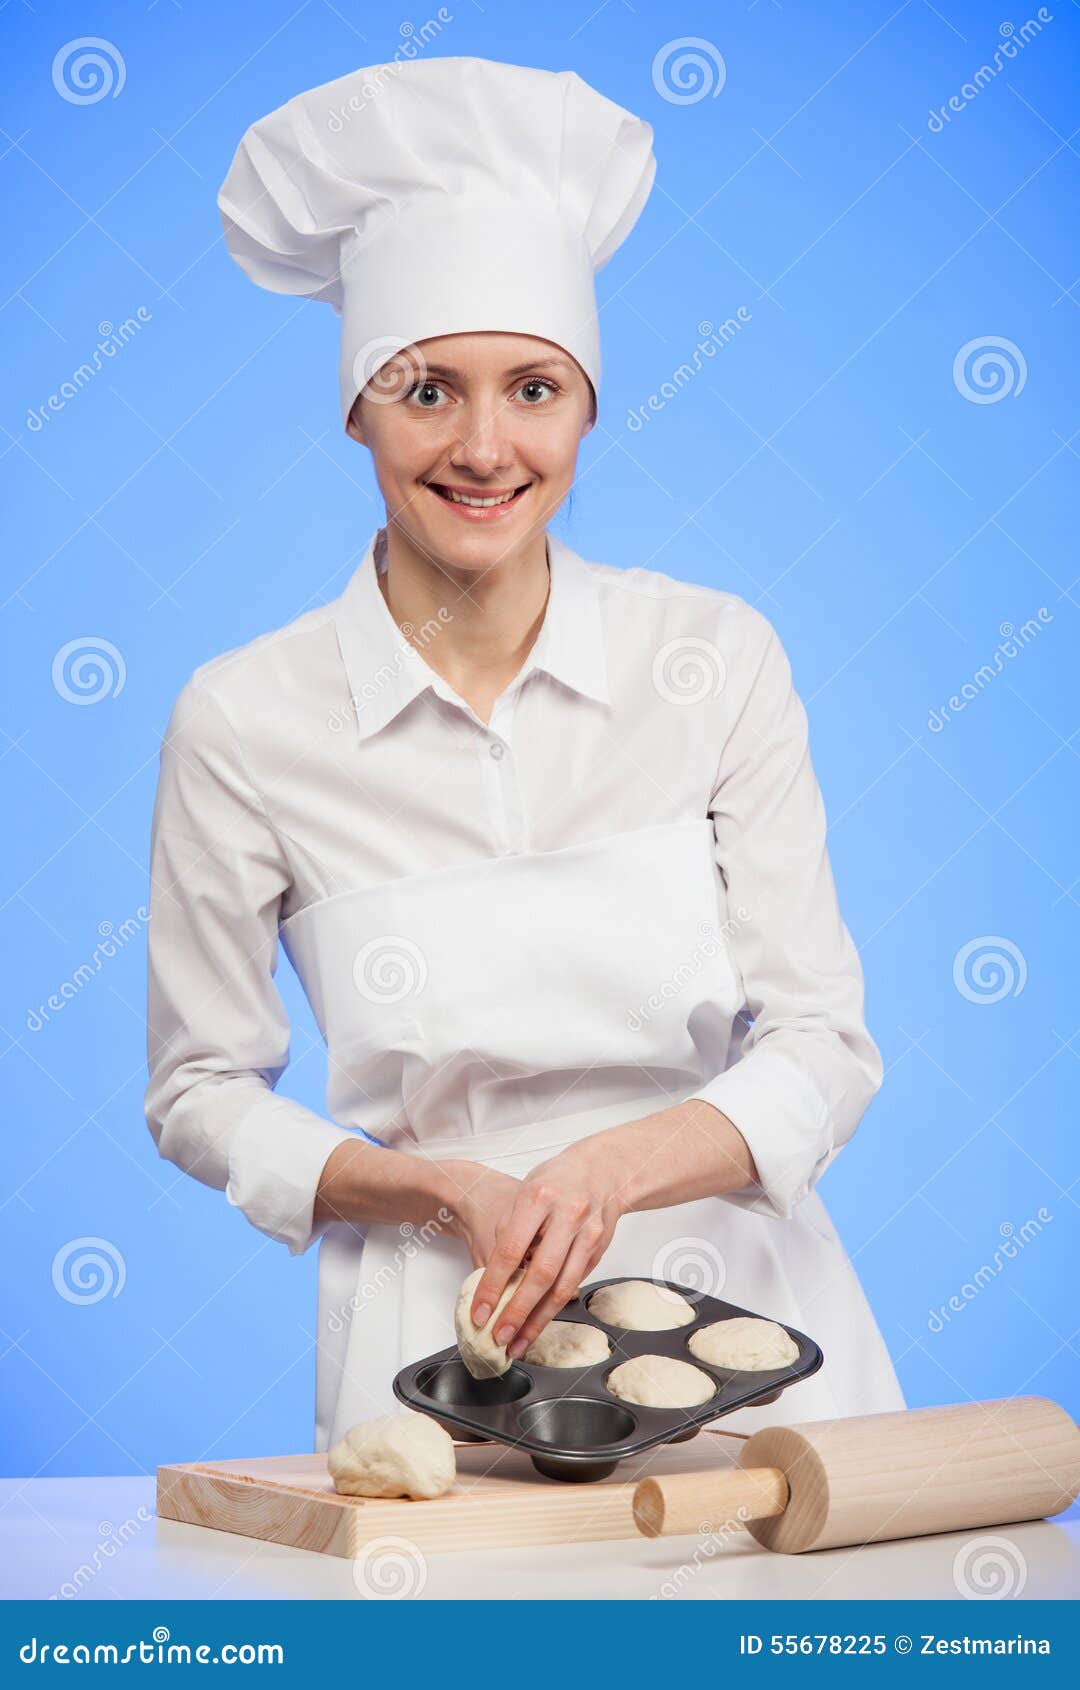 Smiling Woman Cook Making Tasty Cakes Stock Image - Image of dough ...